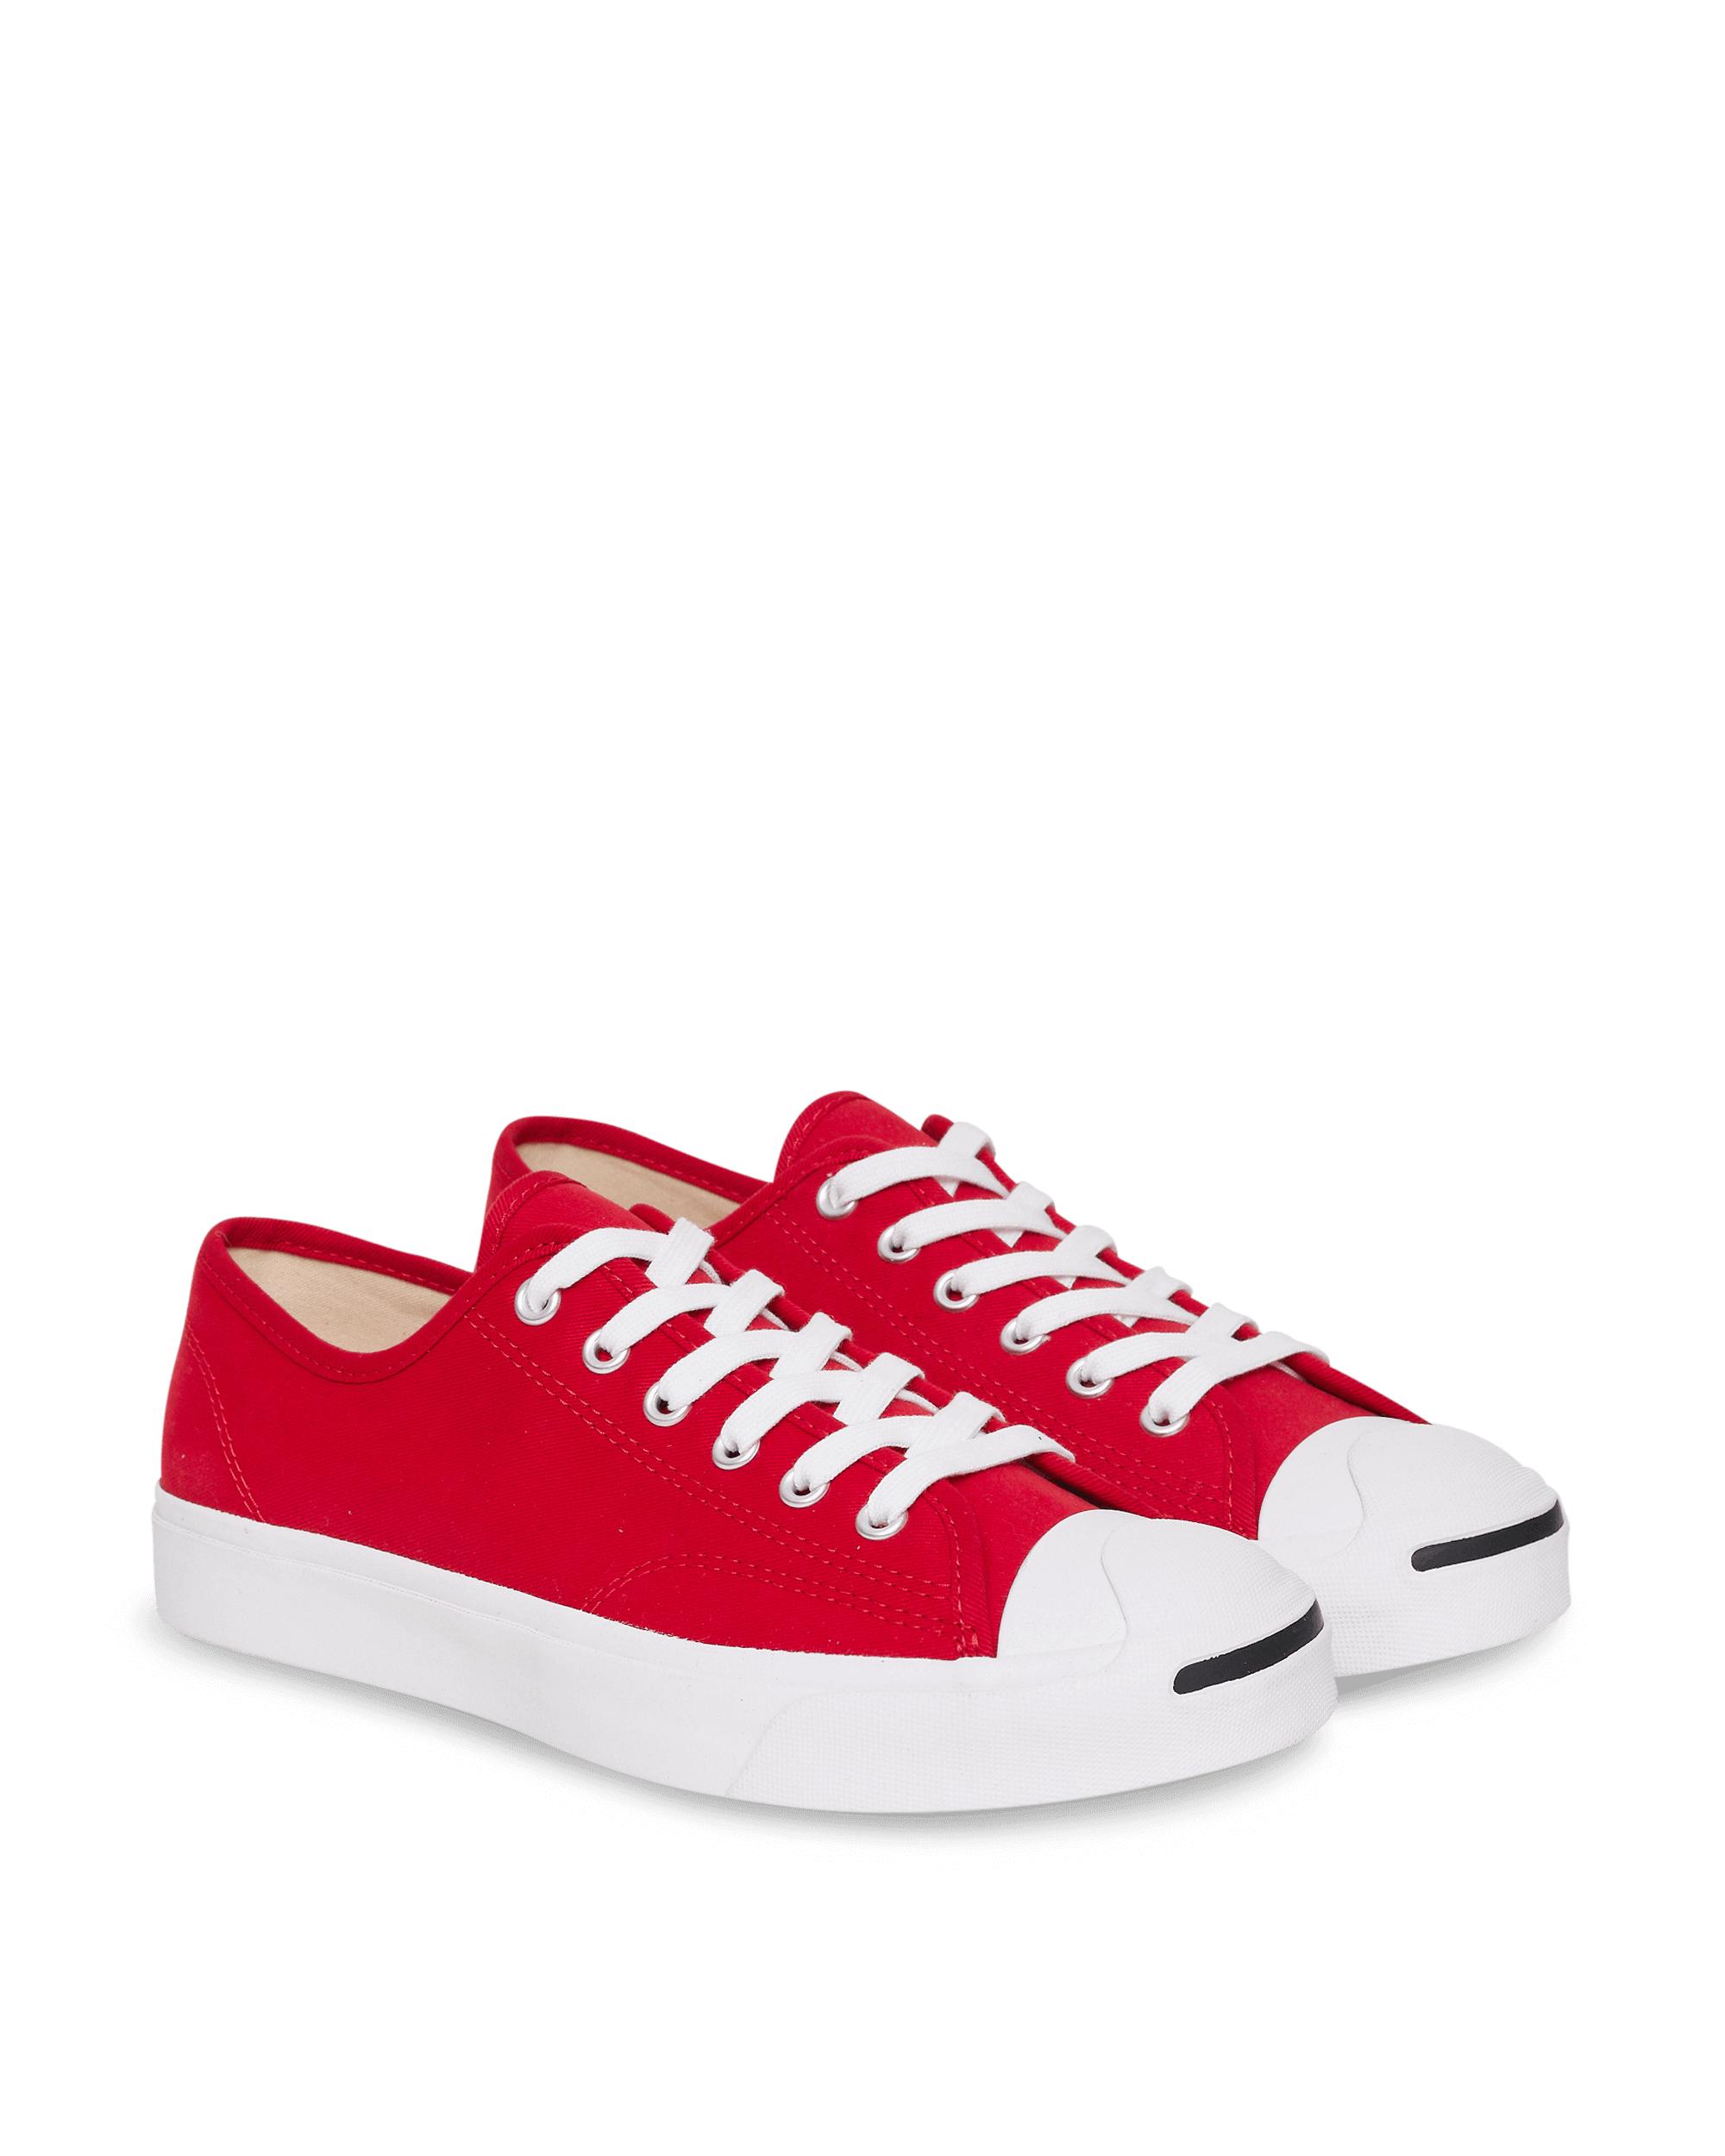 Converse Jack Purcell Sneakers in Red for | Lyst